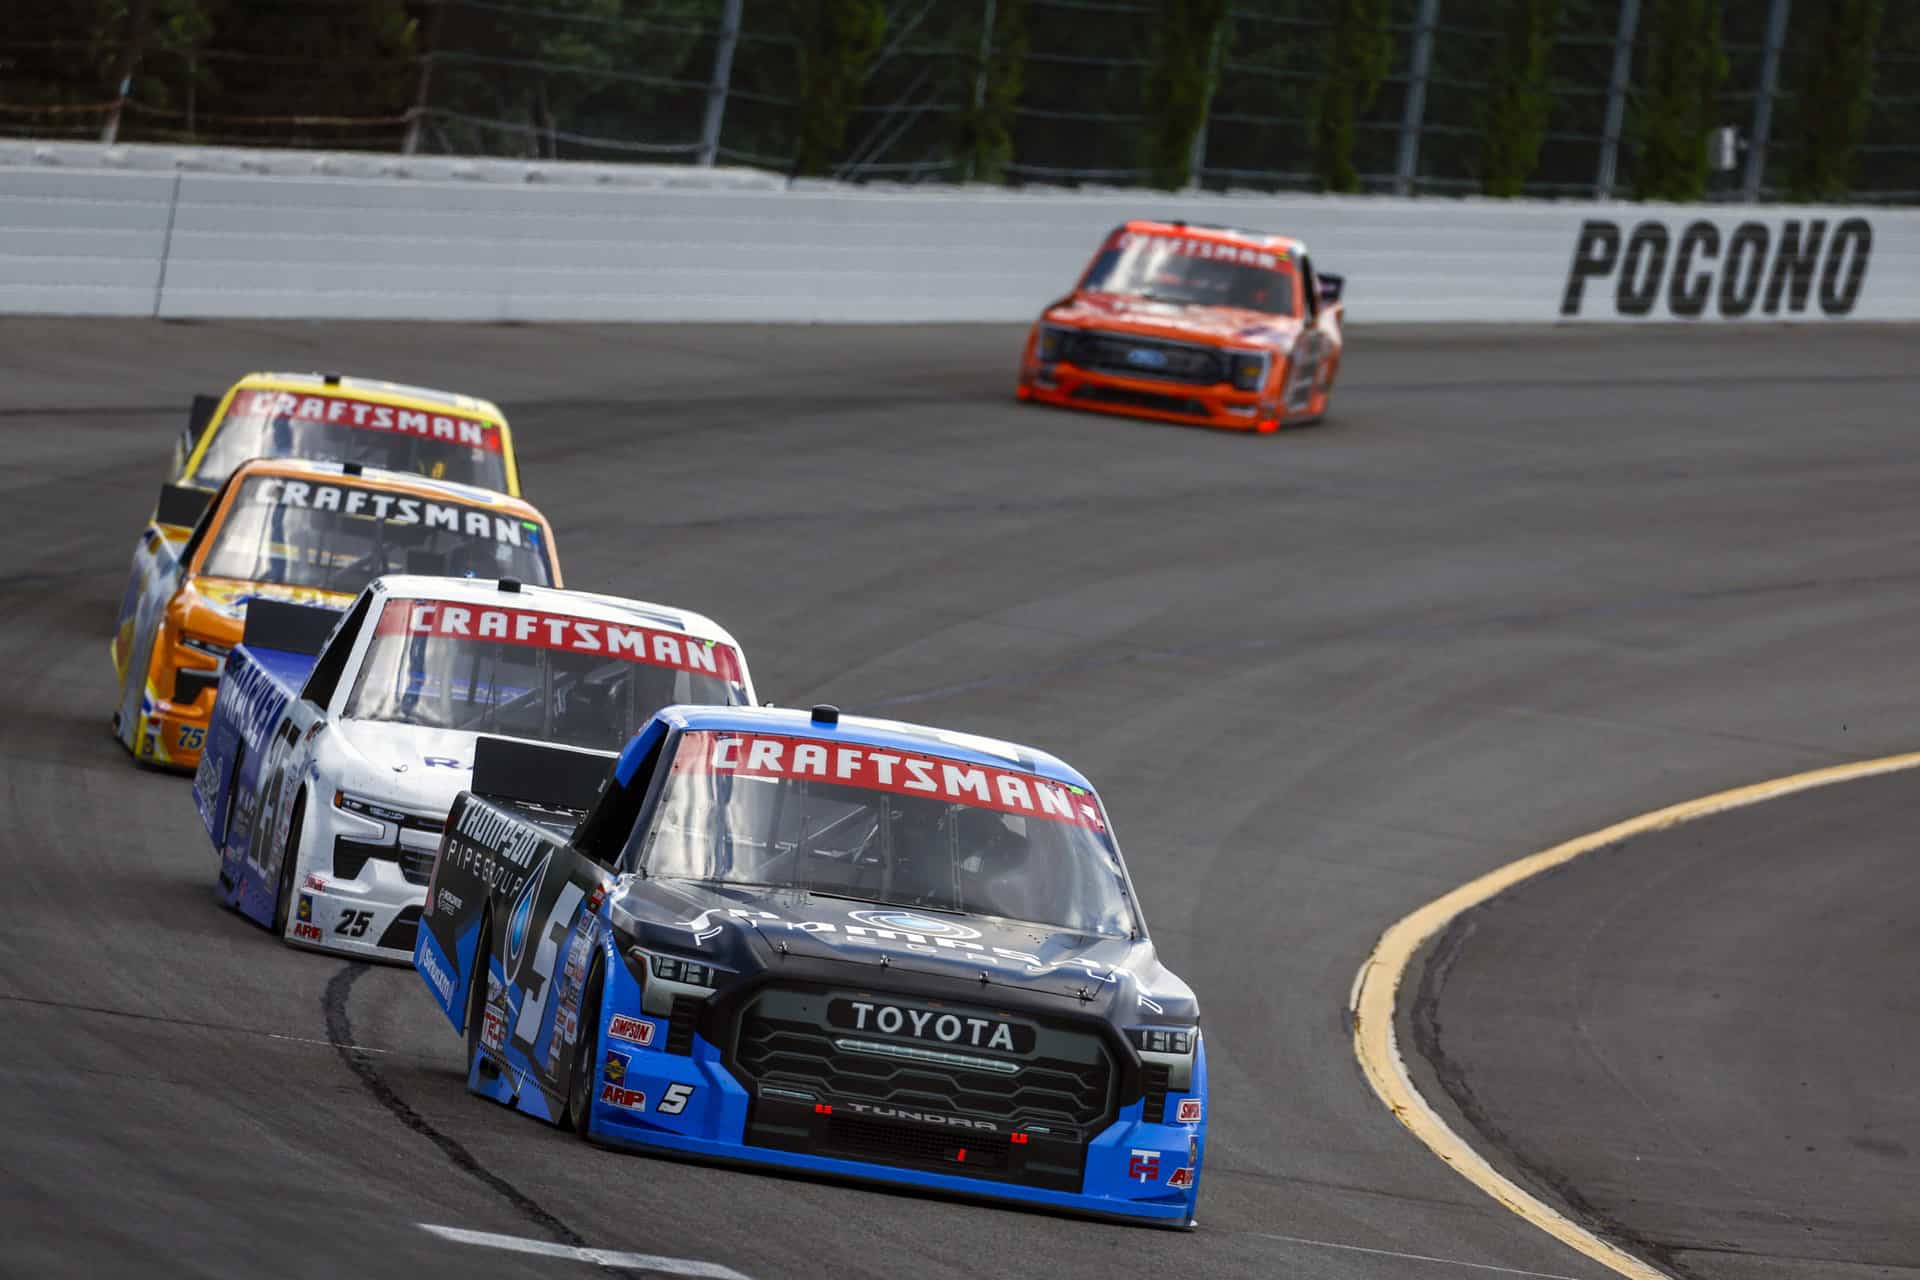 Dean thompson rebounded from three consecutive races in which he dnf'd with a top-10 finish in the nascar craftsman truck series at pocono raceway.